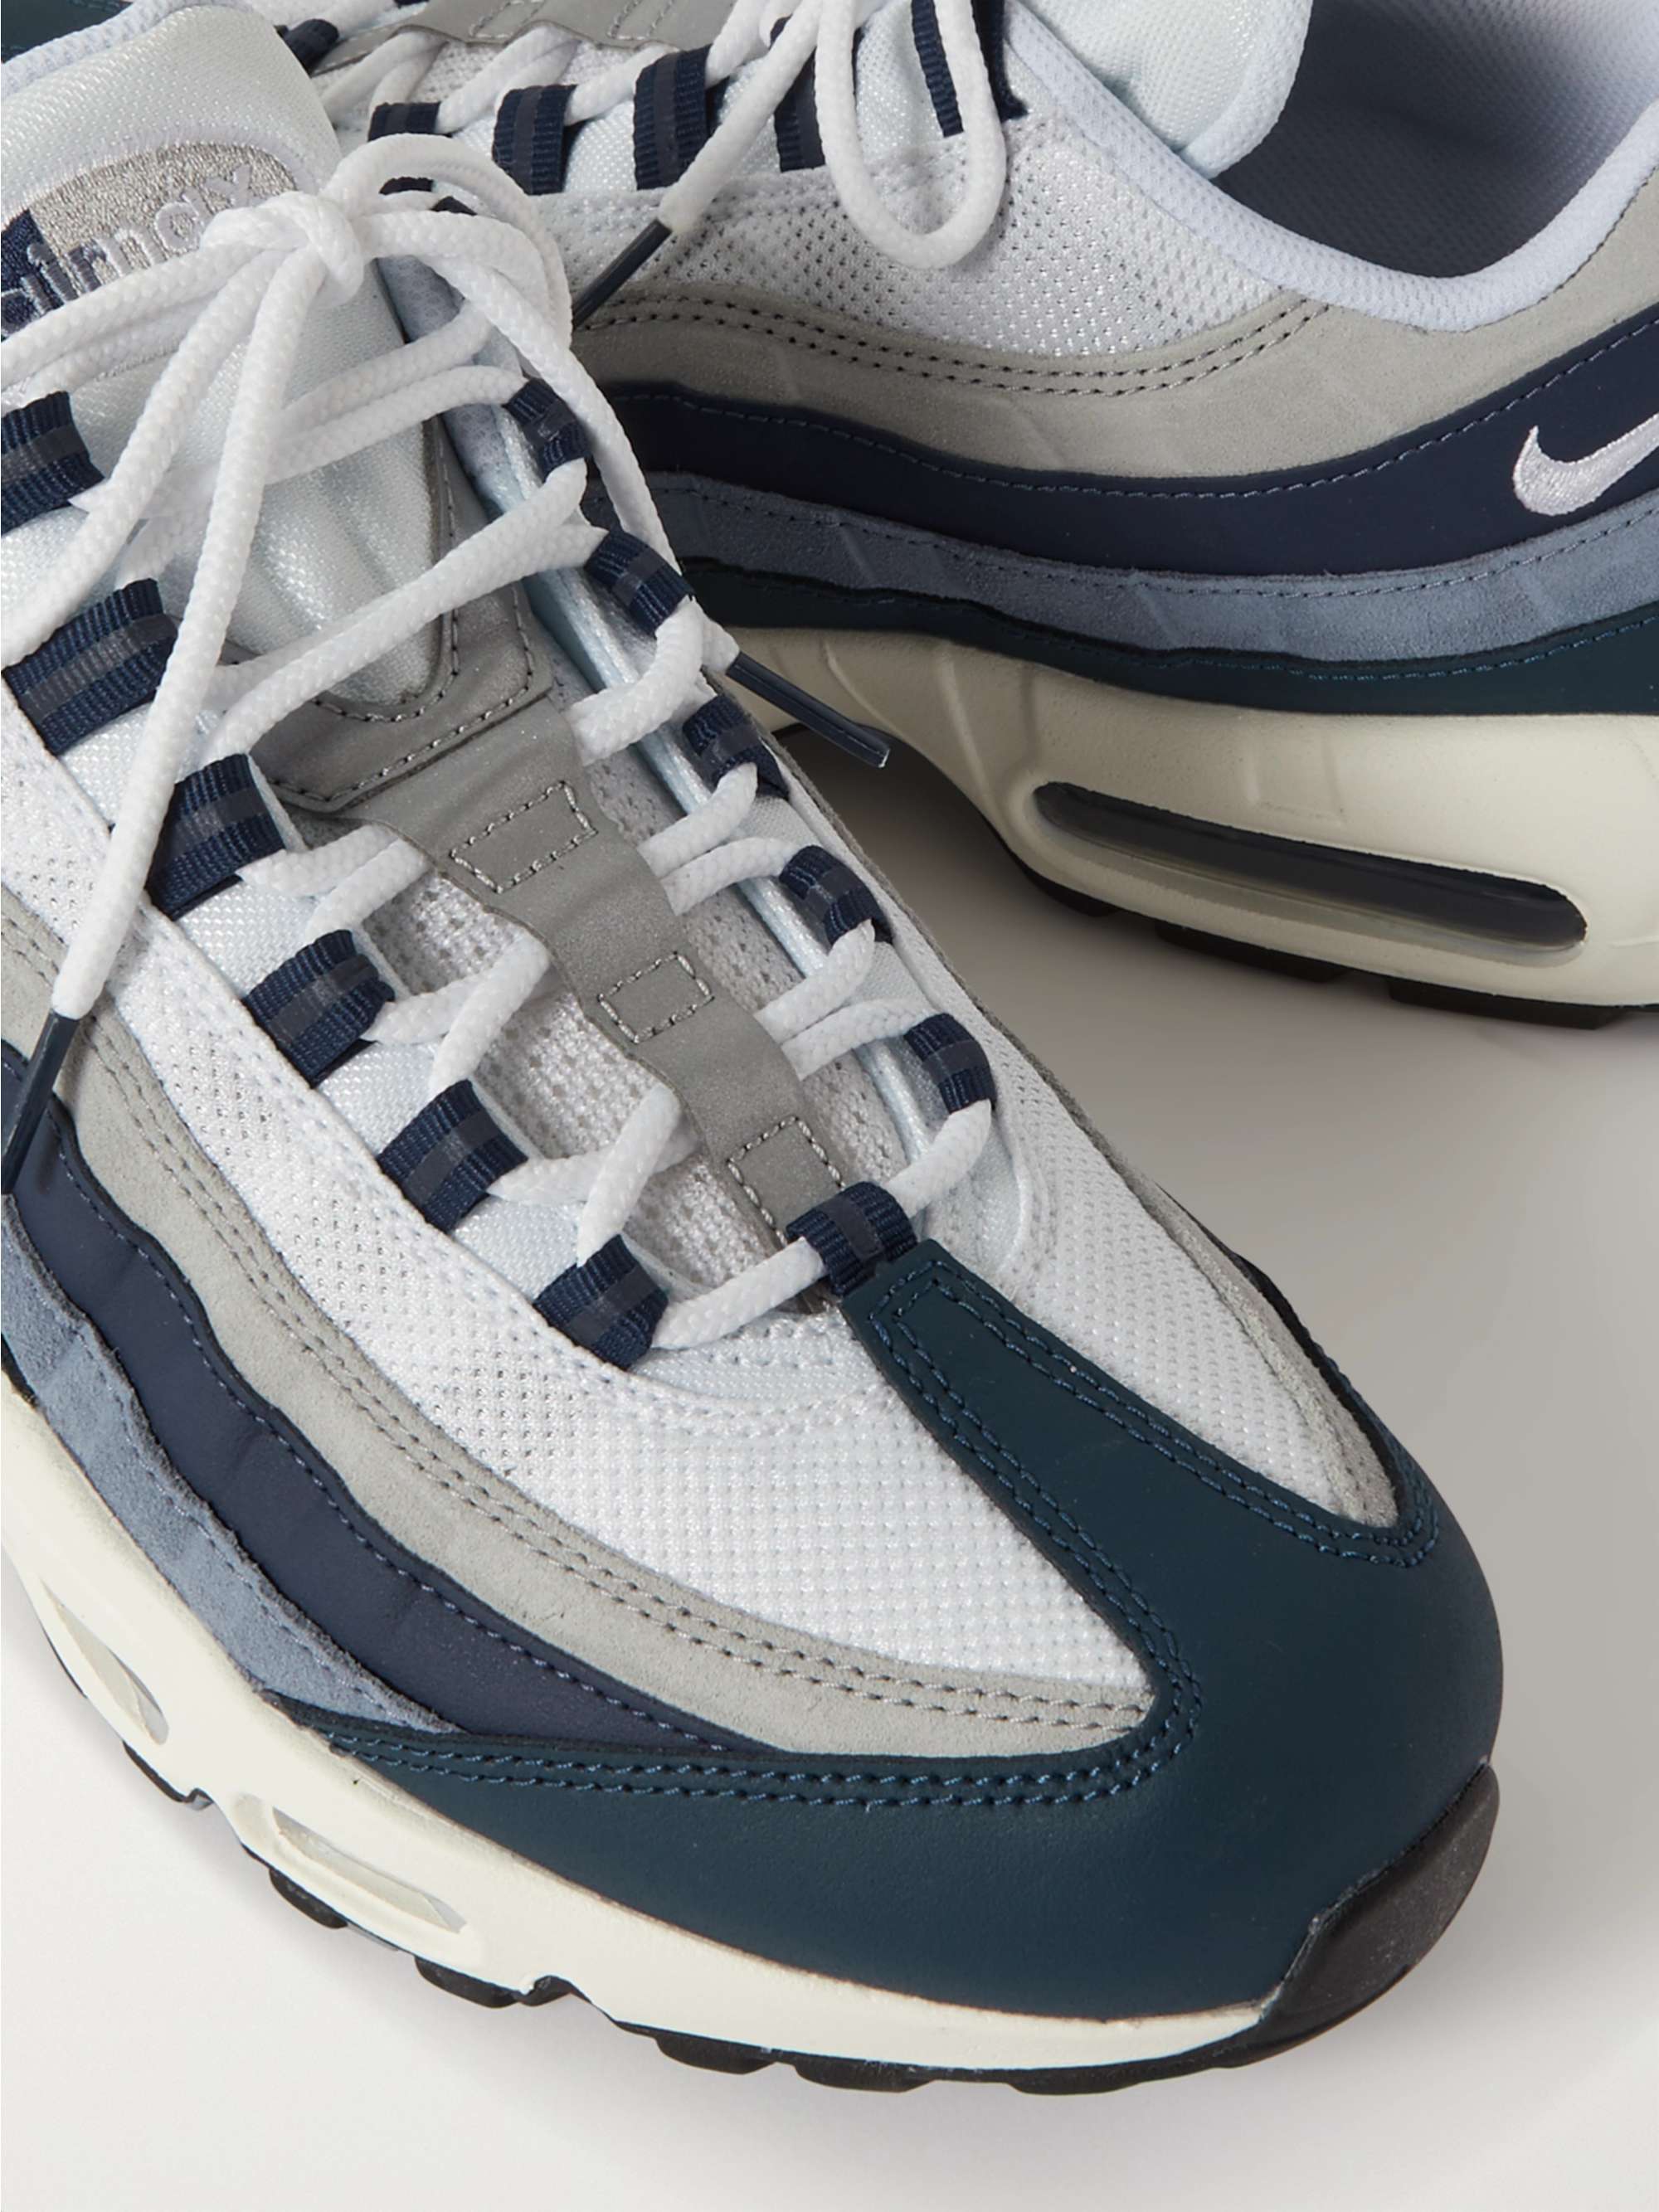 NIKE Air Max 95 Panelled Leather, Suede and Mesh Sneakers